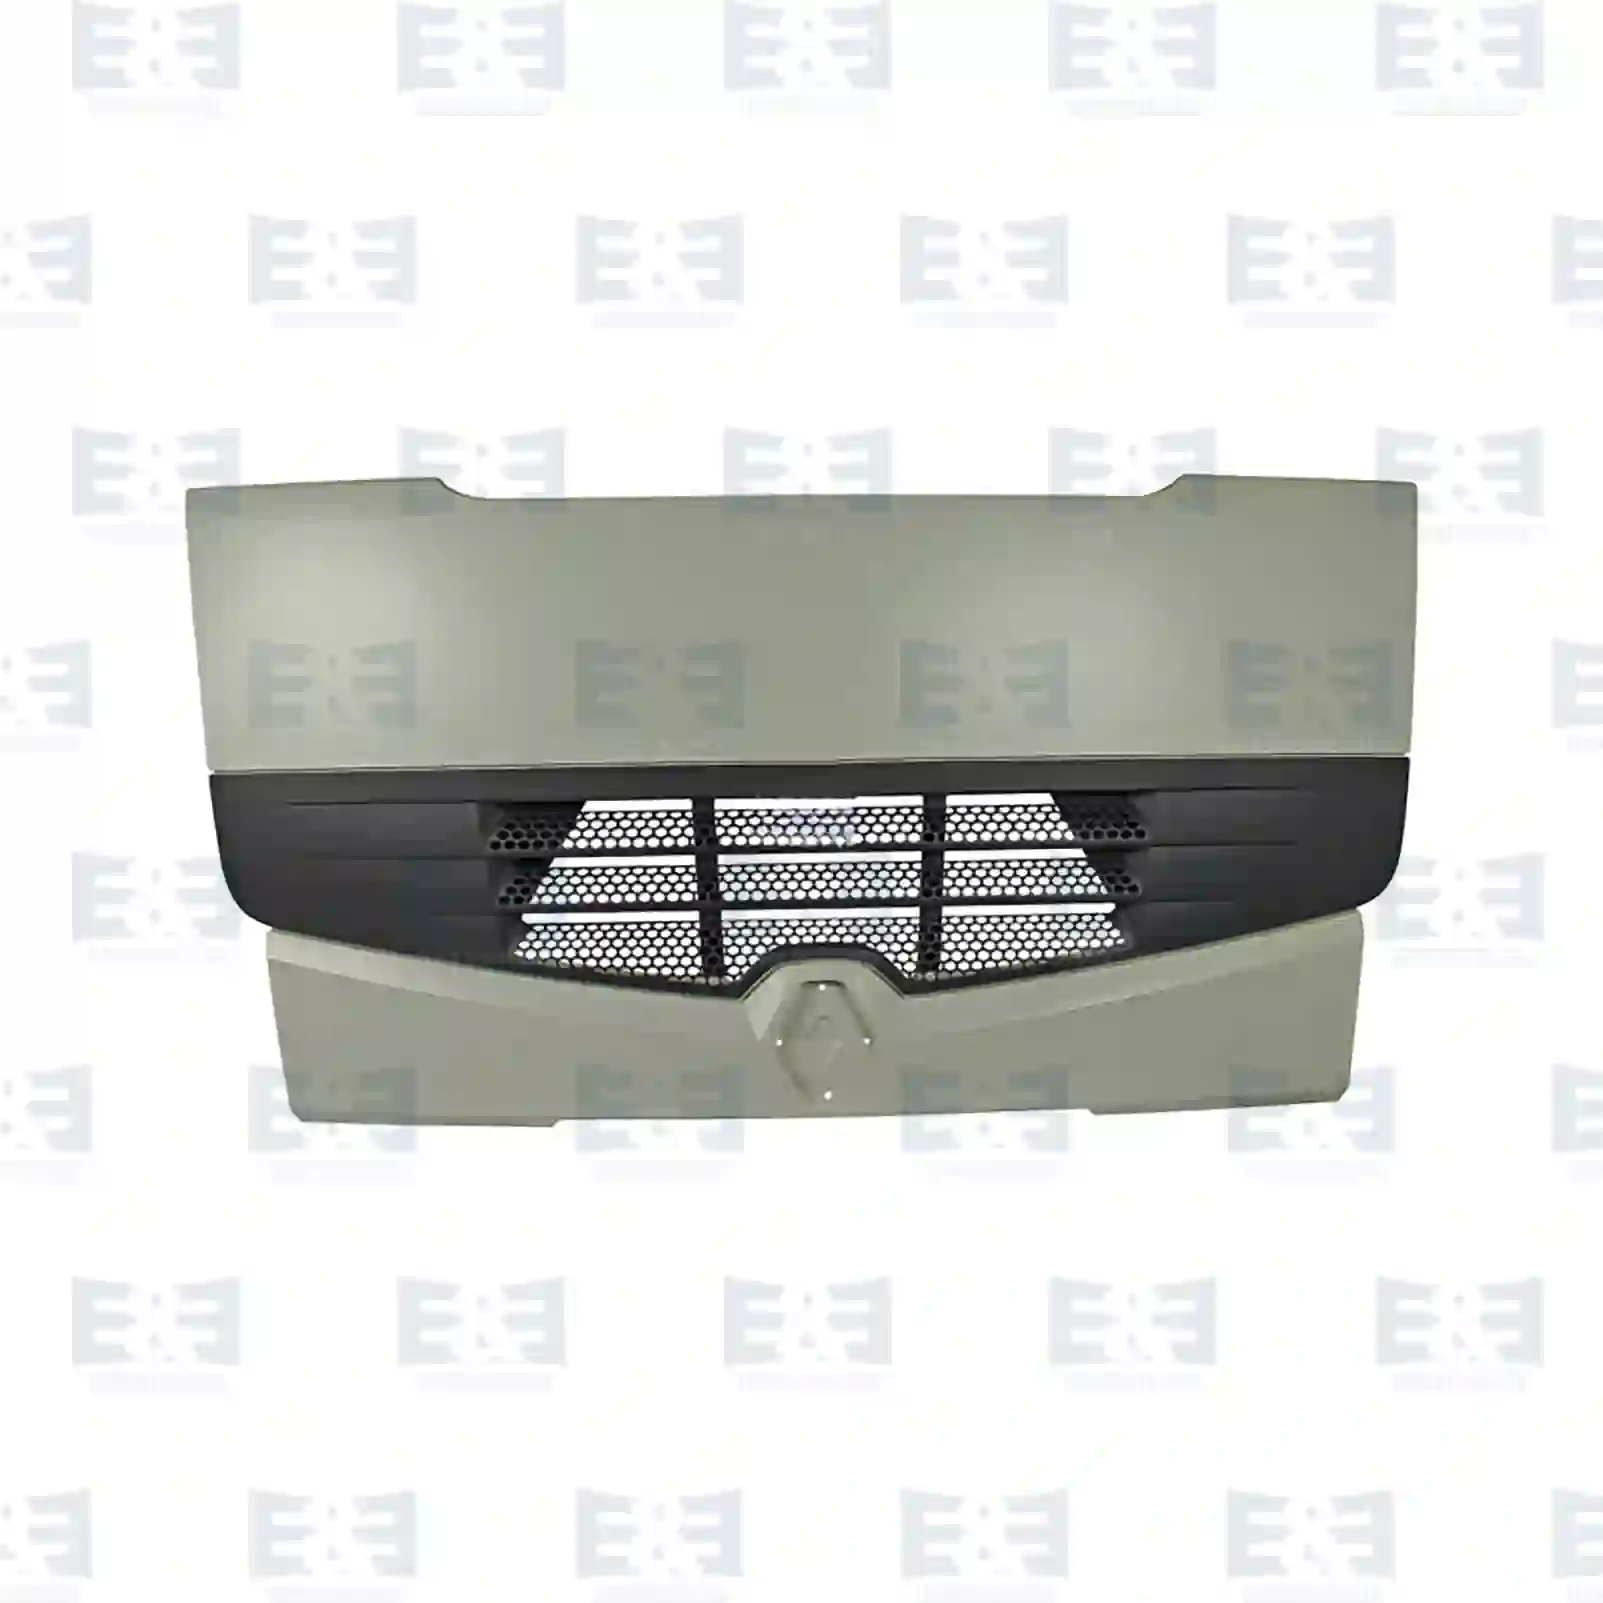 Front grill, without gas springs, 2E2280805, 5010578248 ||  2E2280805 E&E Truck Spare Parts | Truck Spare Parts, Auotomotive Spare Parts Front grill, without gas springs, 2E2280805, 5010578248 ||  2E2280805 E&E Truck Spare Parts | Truck Spare Parts, Auotomotive Spare Parts